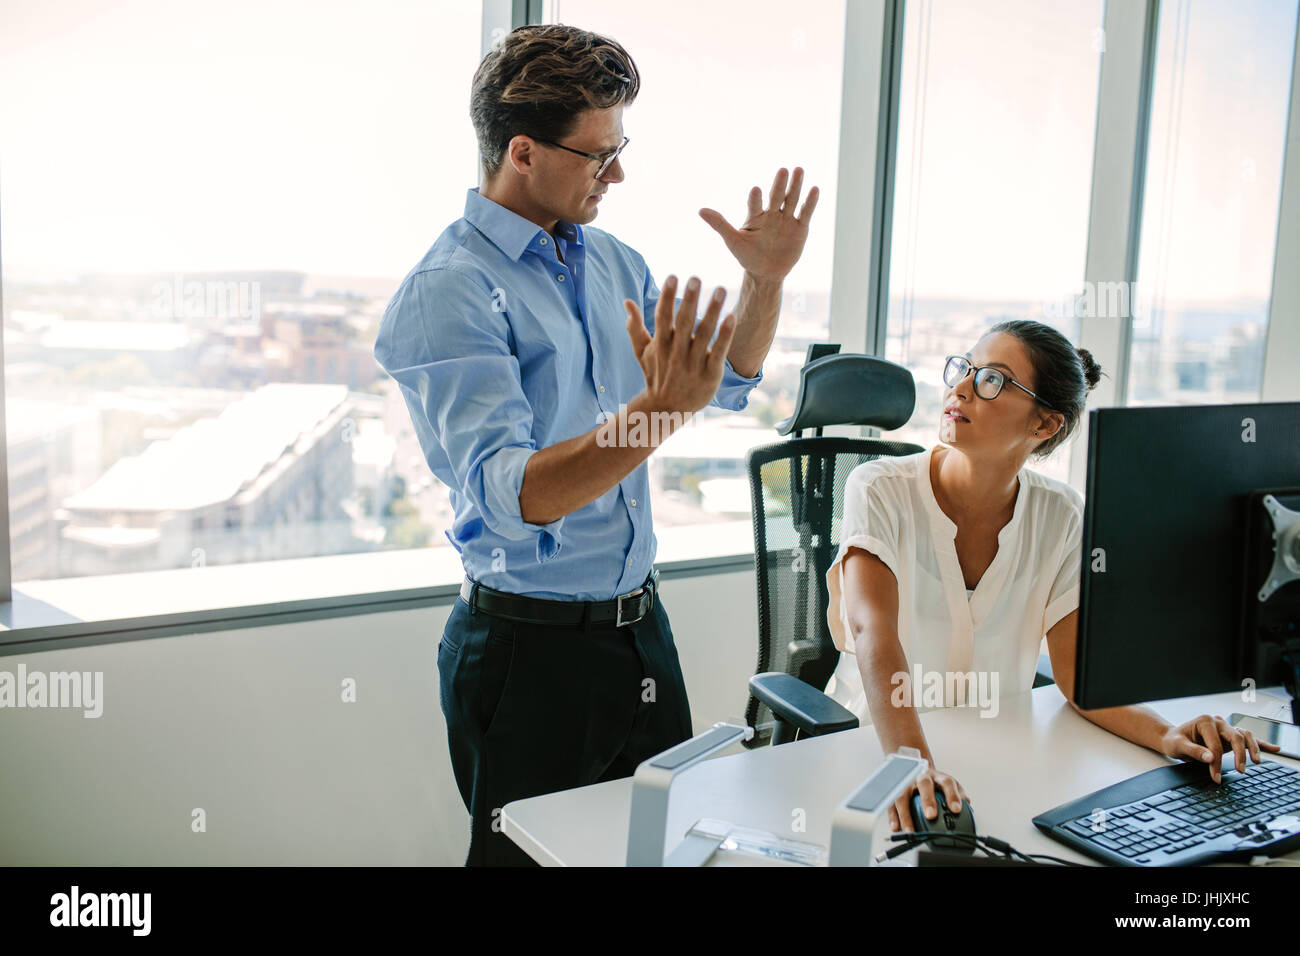 Mature man explaining new business strategy to asian female colleague sitting at her desk. Two business professionals working together in office. Stock Photo